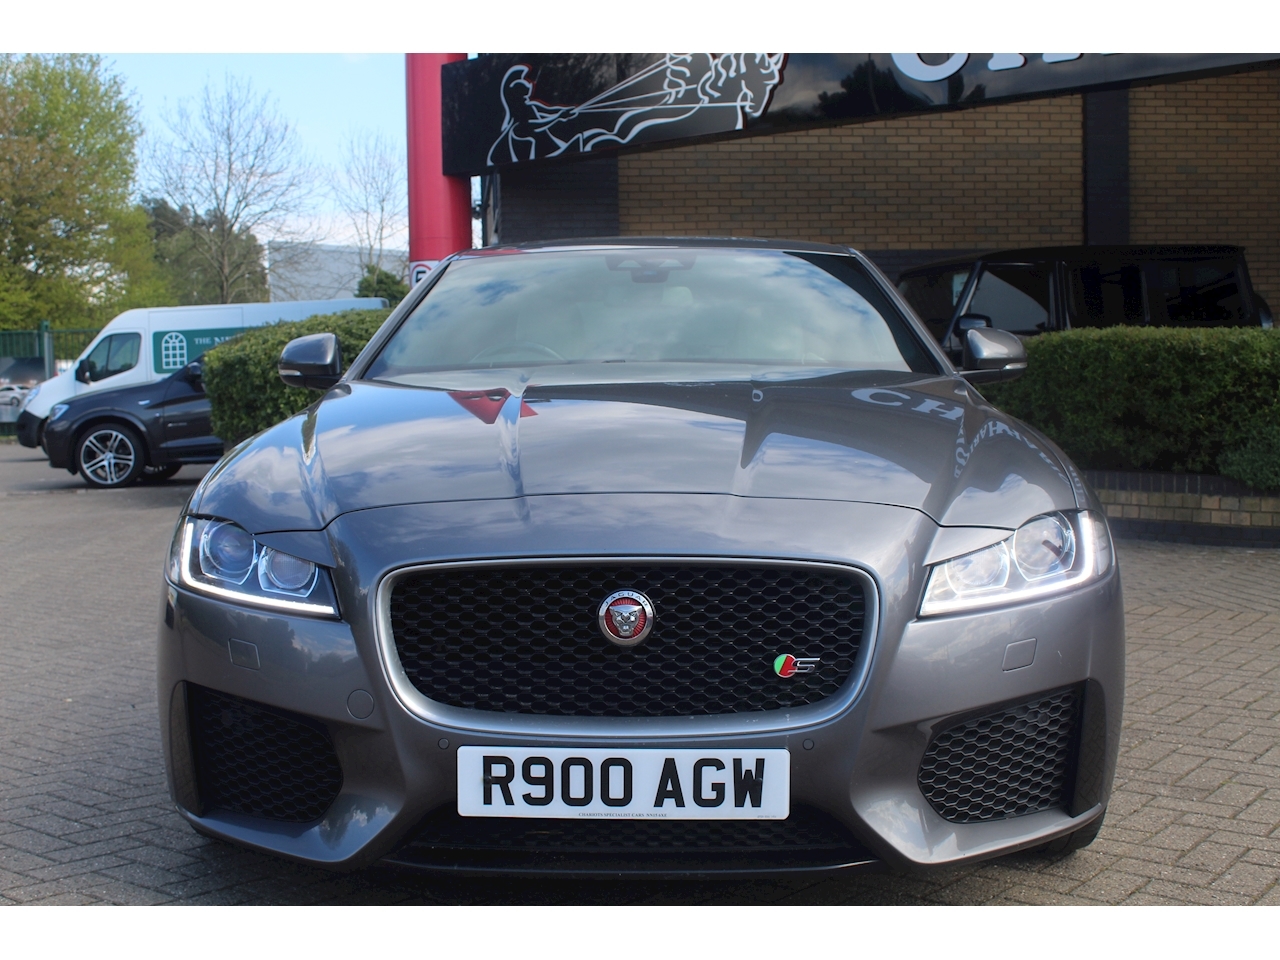 Xf V6 S Saloon 3.0 Automatic Diesel